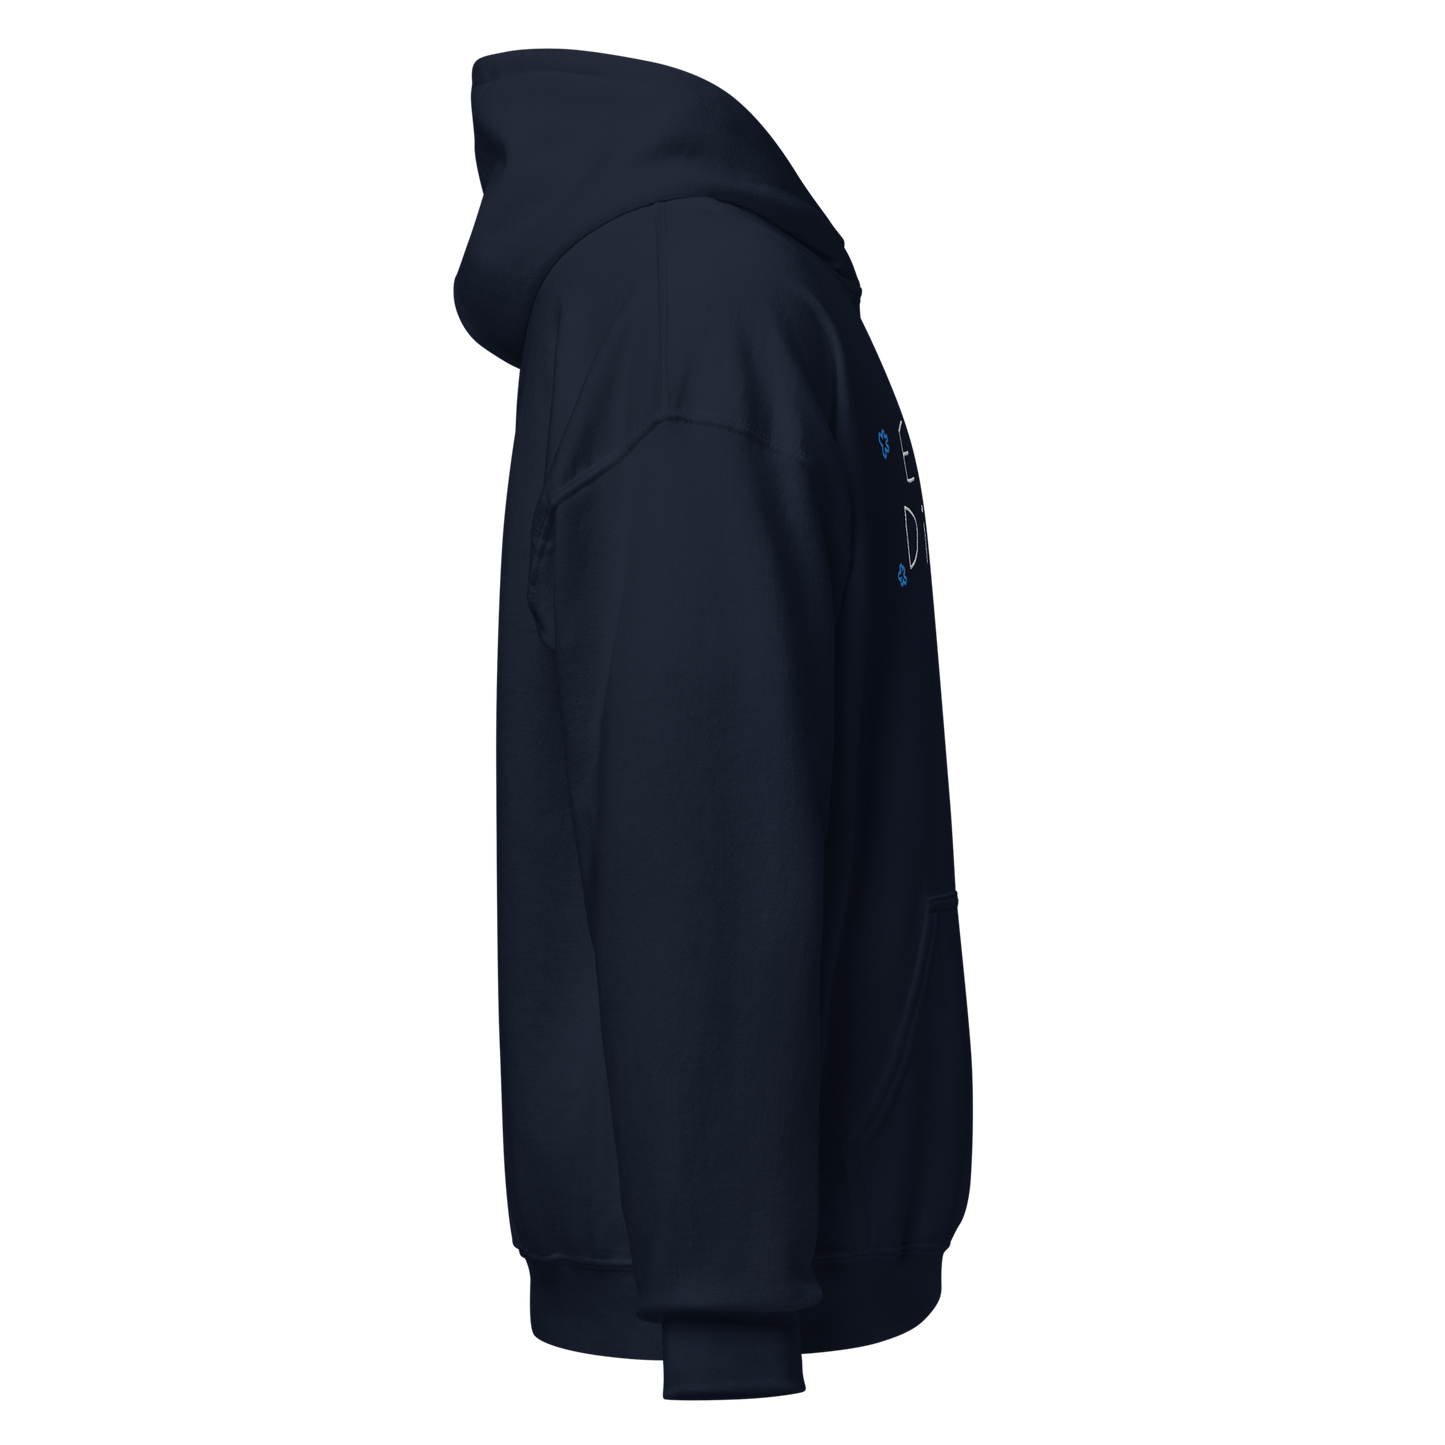 Limited Edition Eat Dirt Navy Hoodie